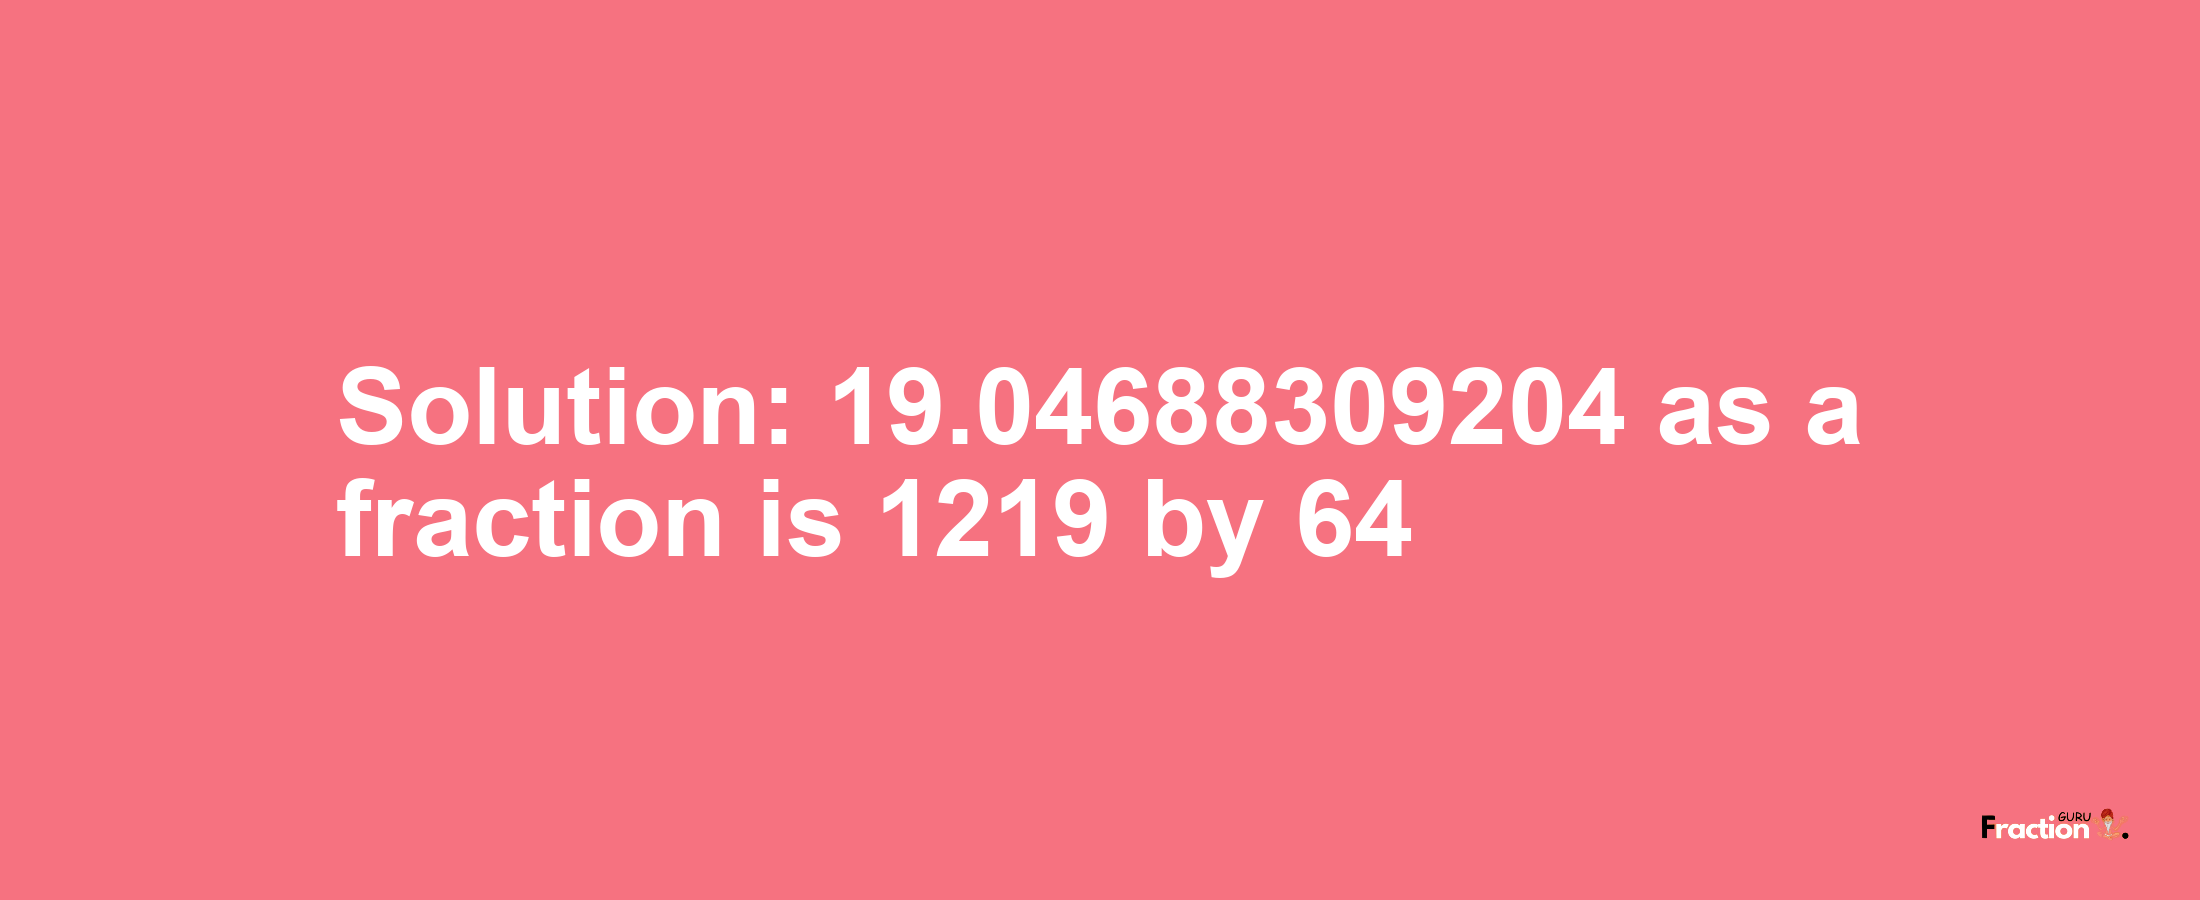 Solution:19.04688309204 as a fraction is 1219/64